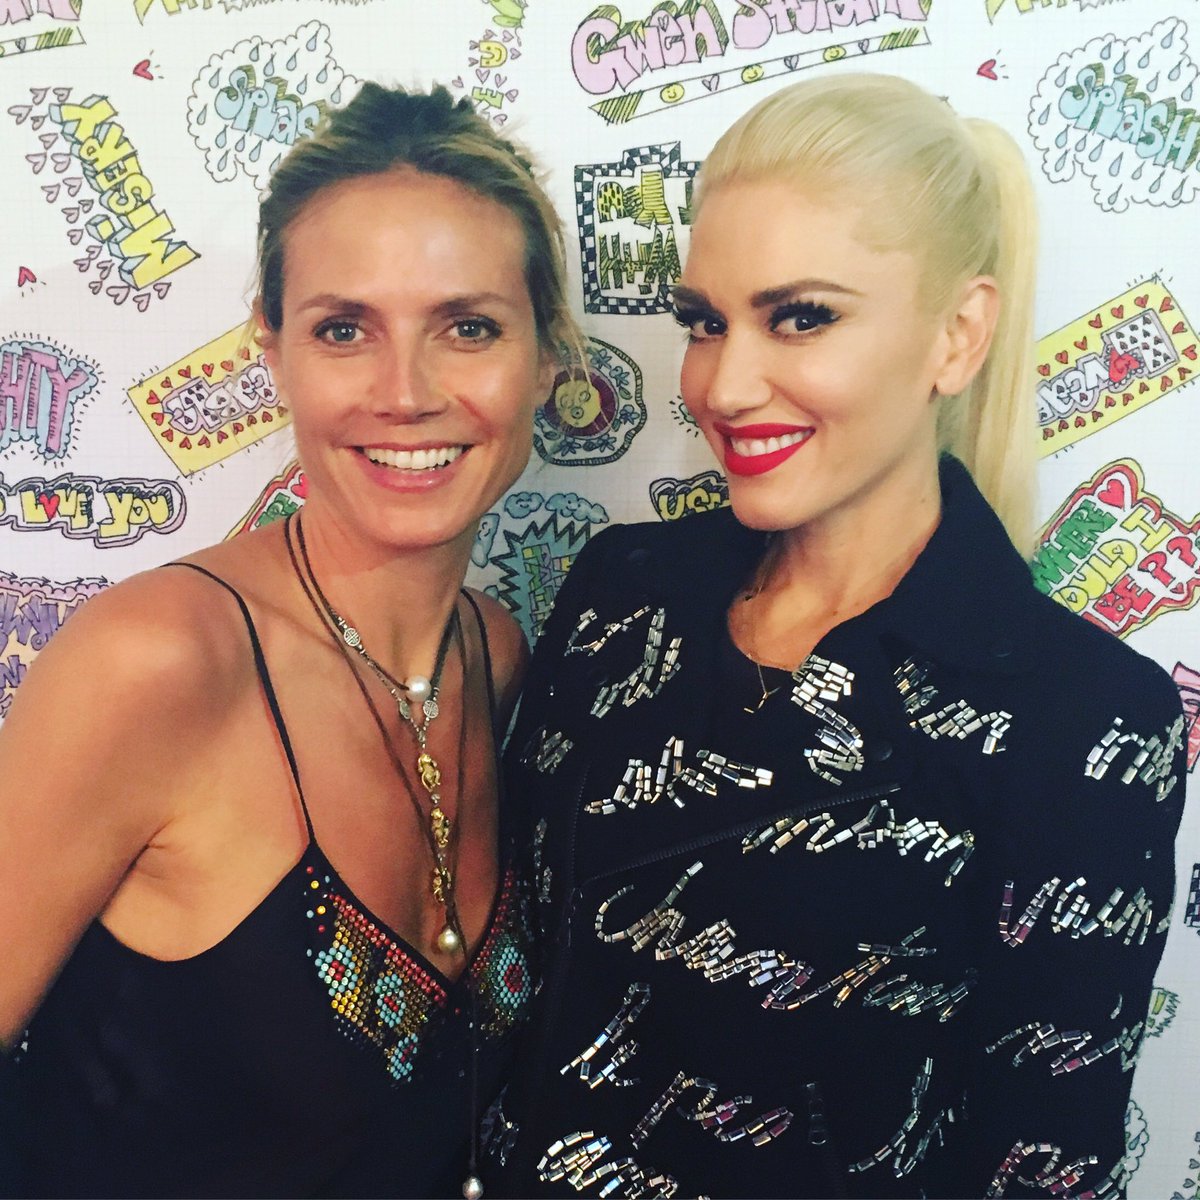 Excited to see you tonight Gwen #Longbeach https://t.co/ZcnCDMwuOG